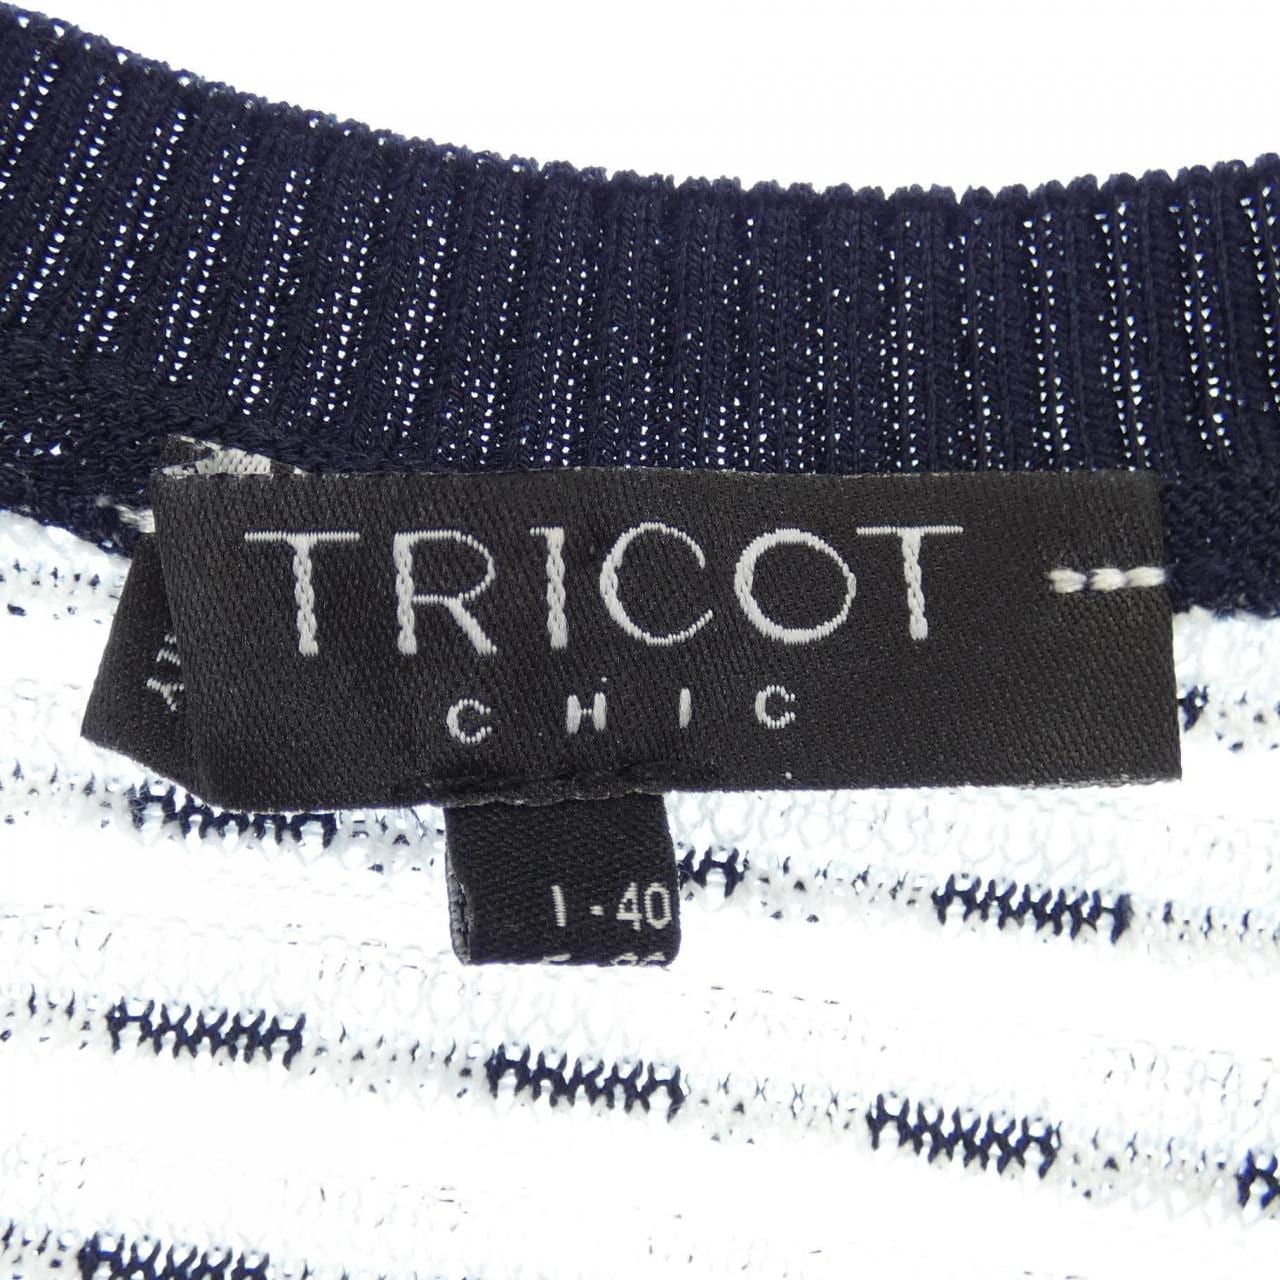 TRICOT CHIC Knit